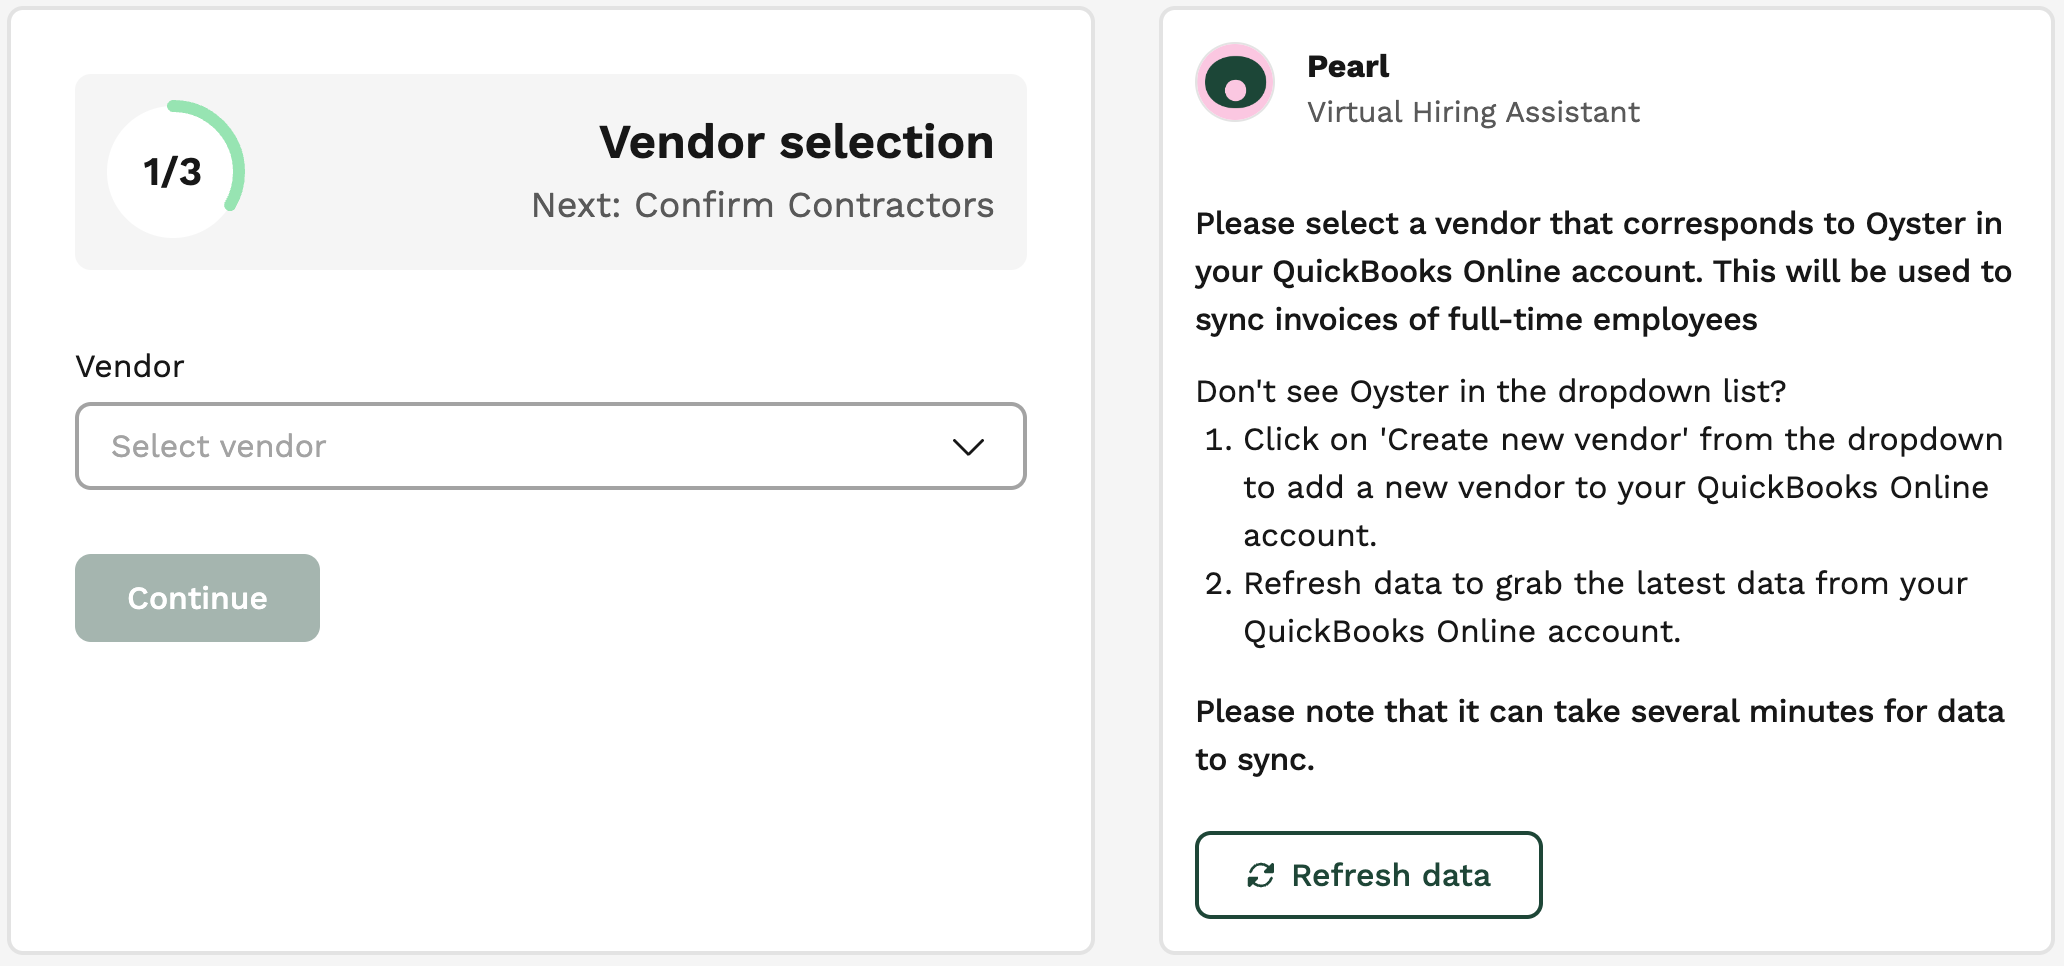 Vendor_selection_step_1_of_3.png